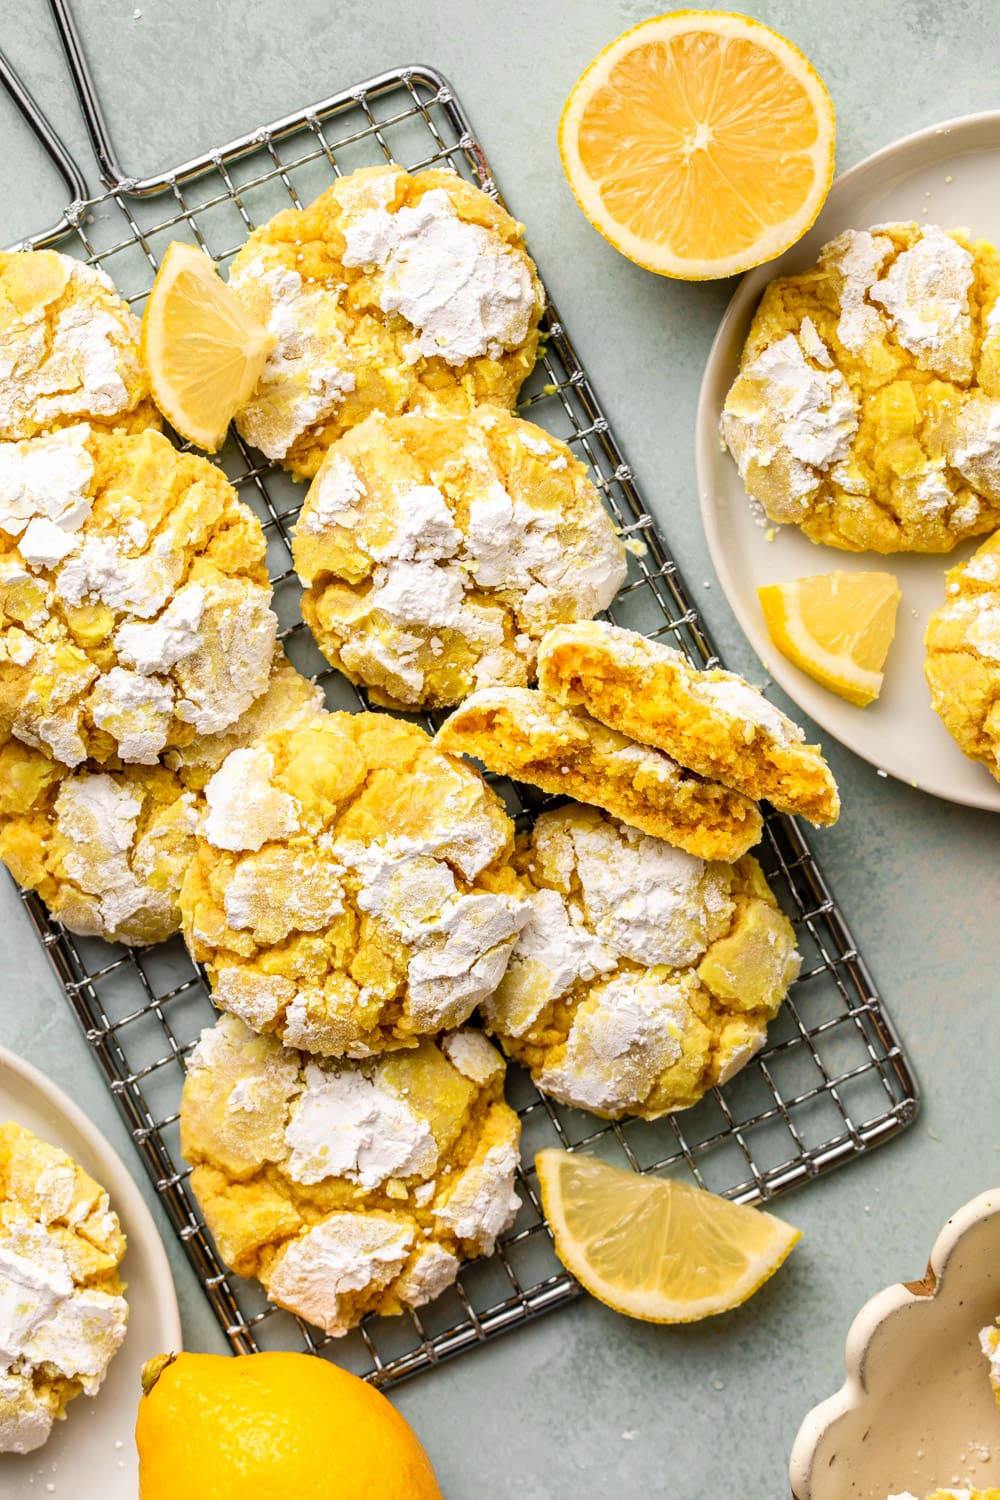 lemon crinkle cookies cooling on a cooling rack next to a plate of lemon cookies and half of a lemon, on a sea green kitchen countertop